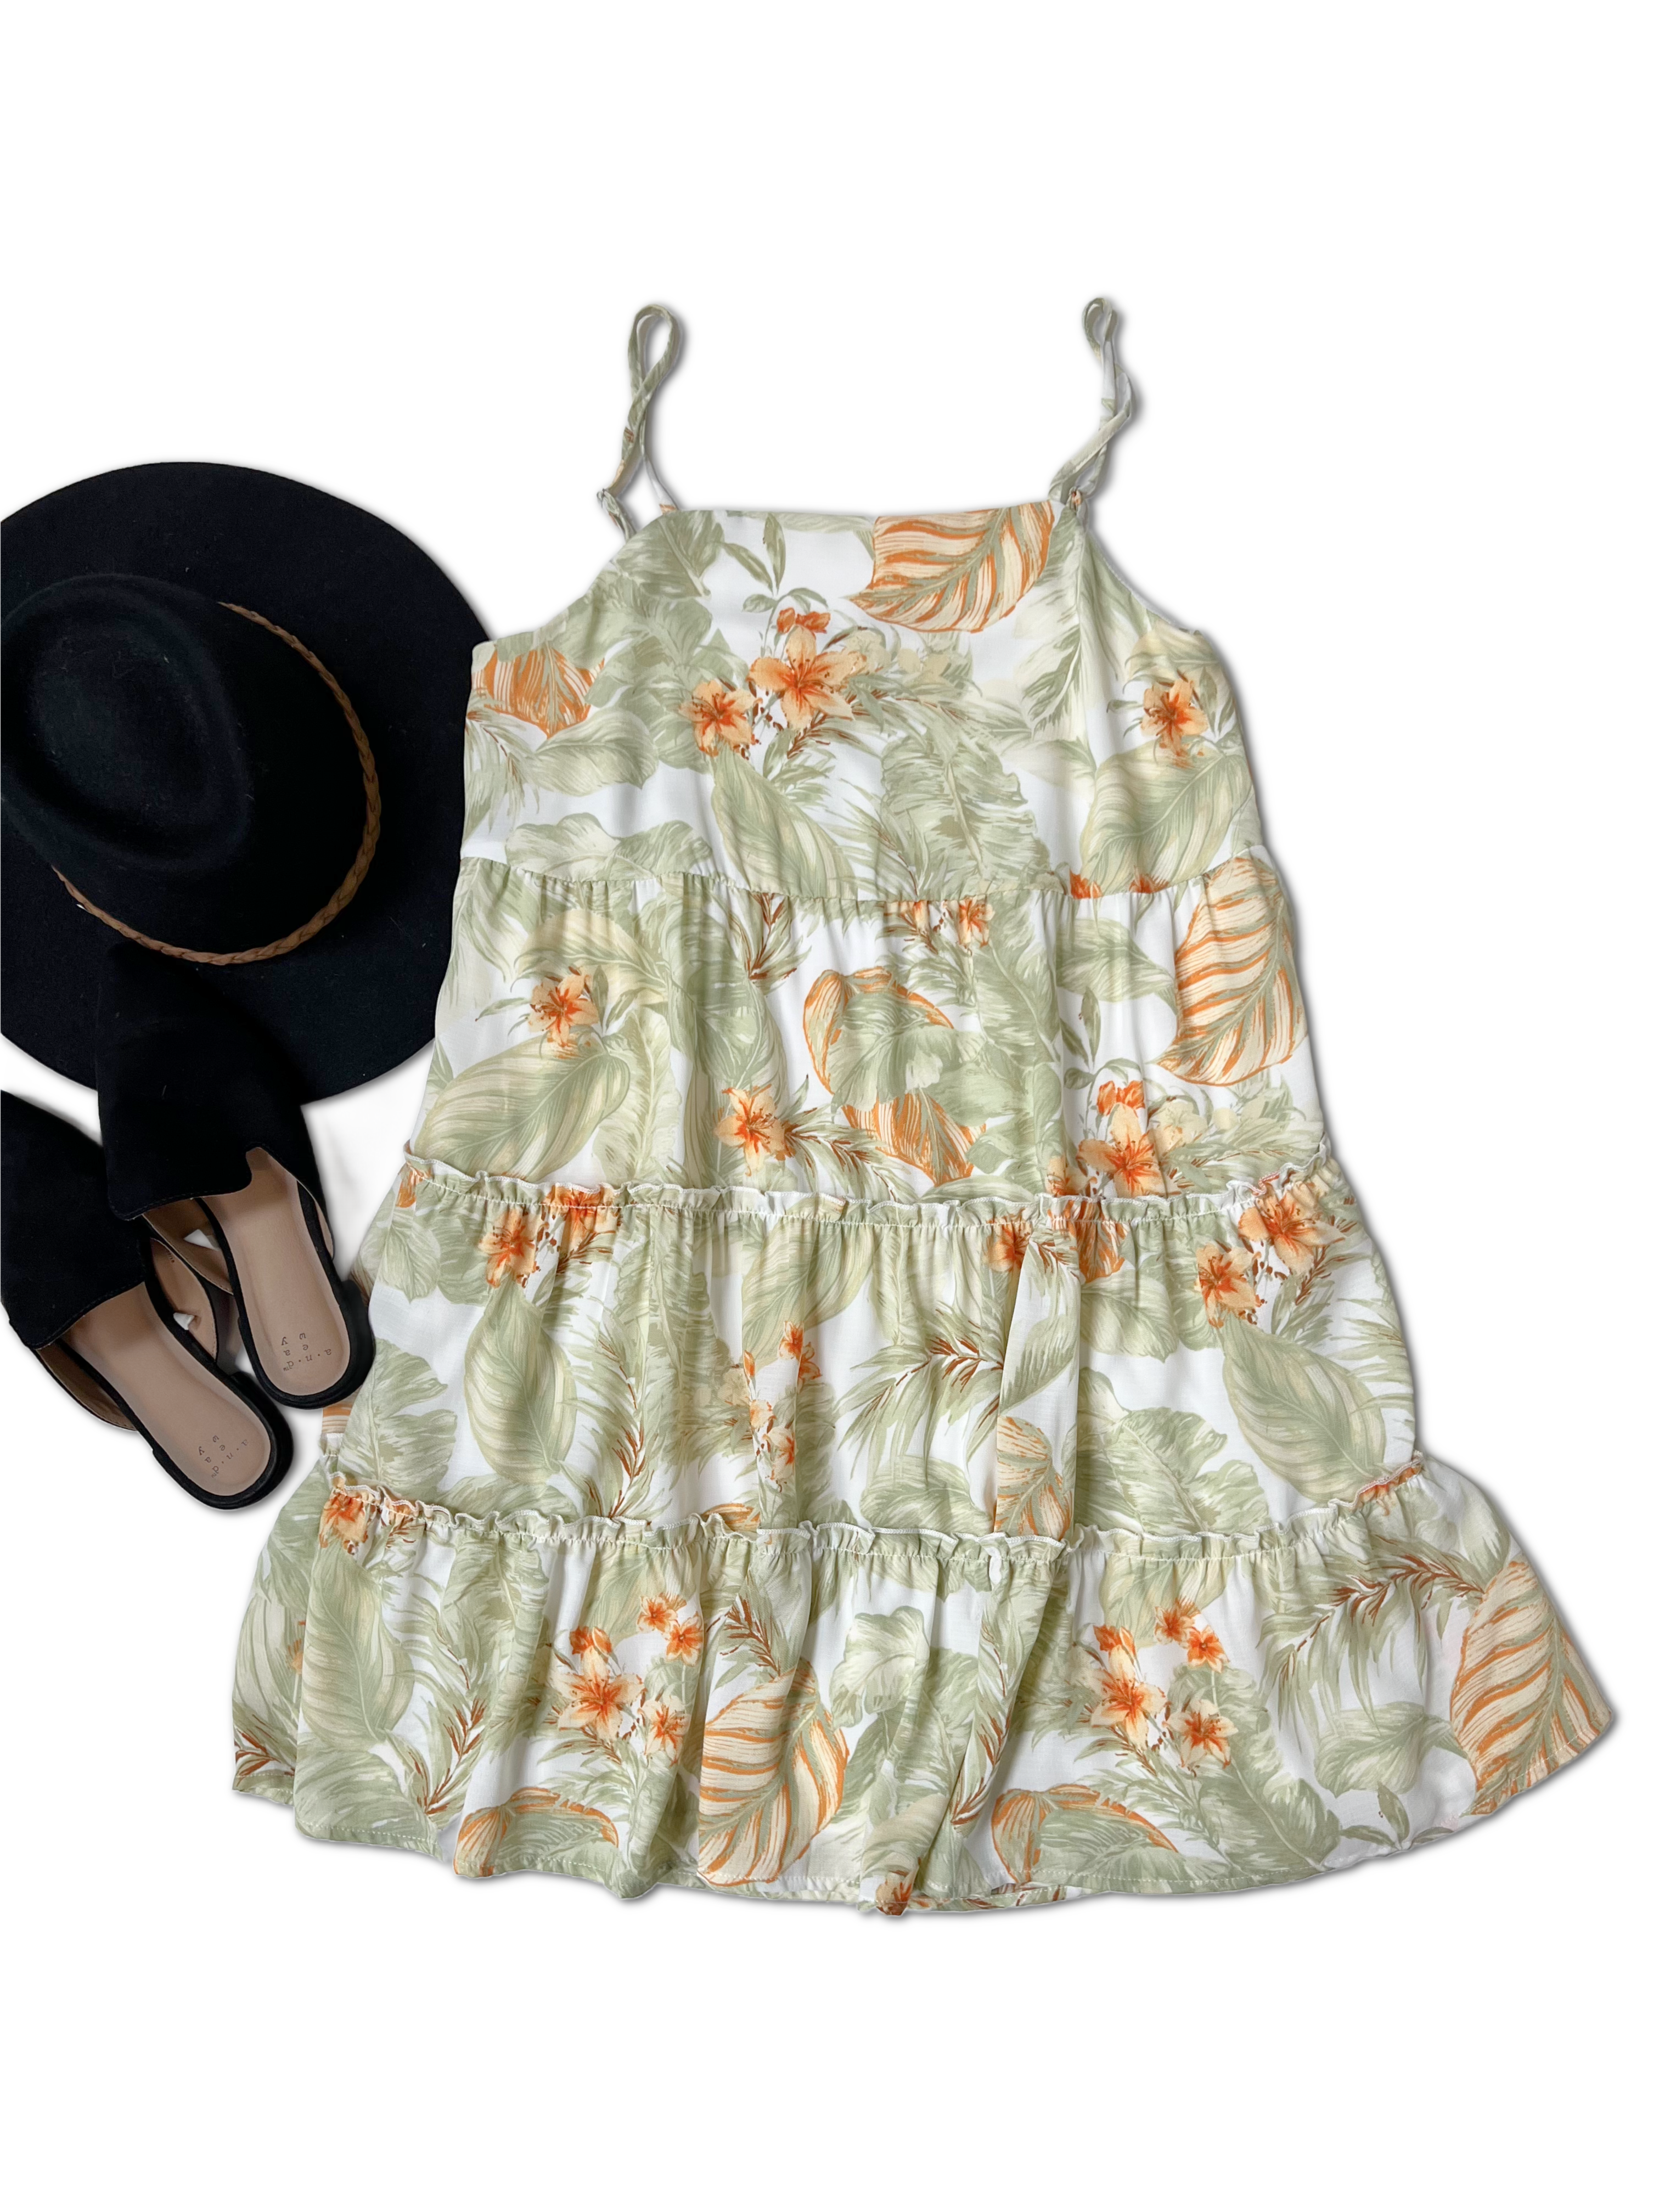 Polagram Tropical Days Dress OOTD Boutique Simplified